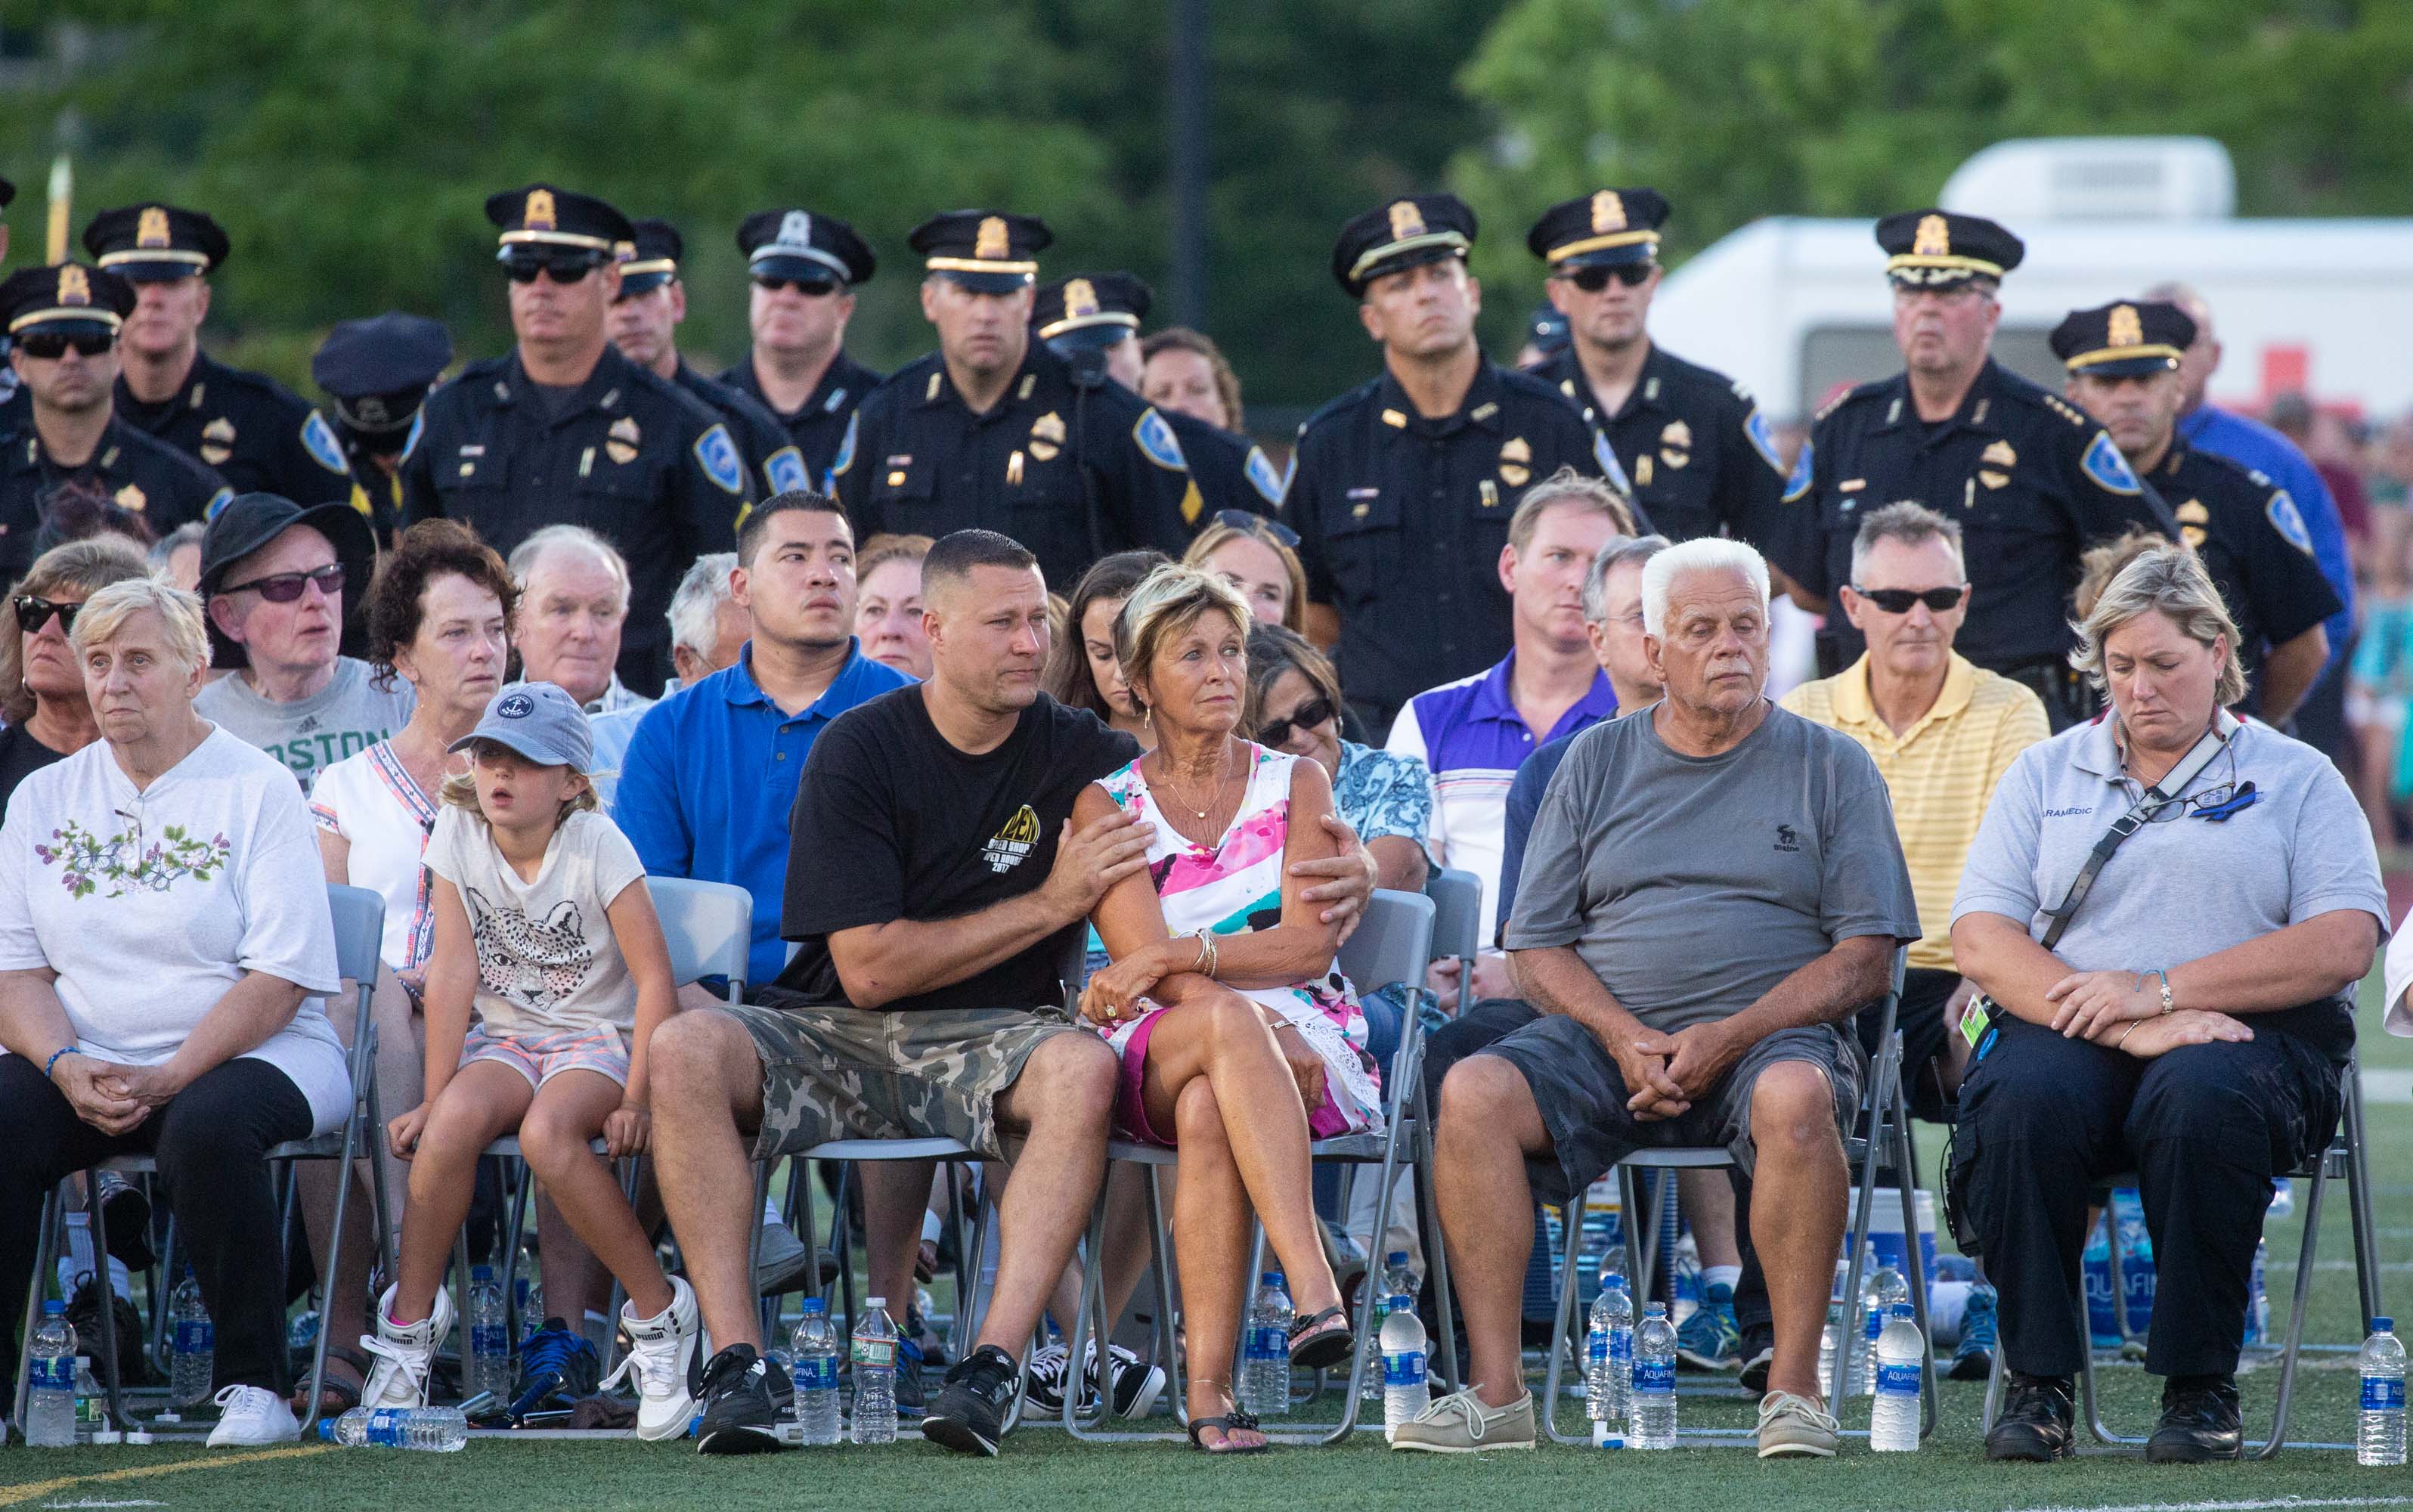 Thousands turn out to pay respects to fallen Weymouth Police Officer